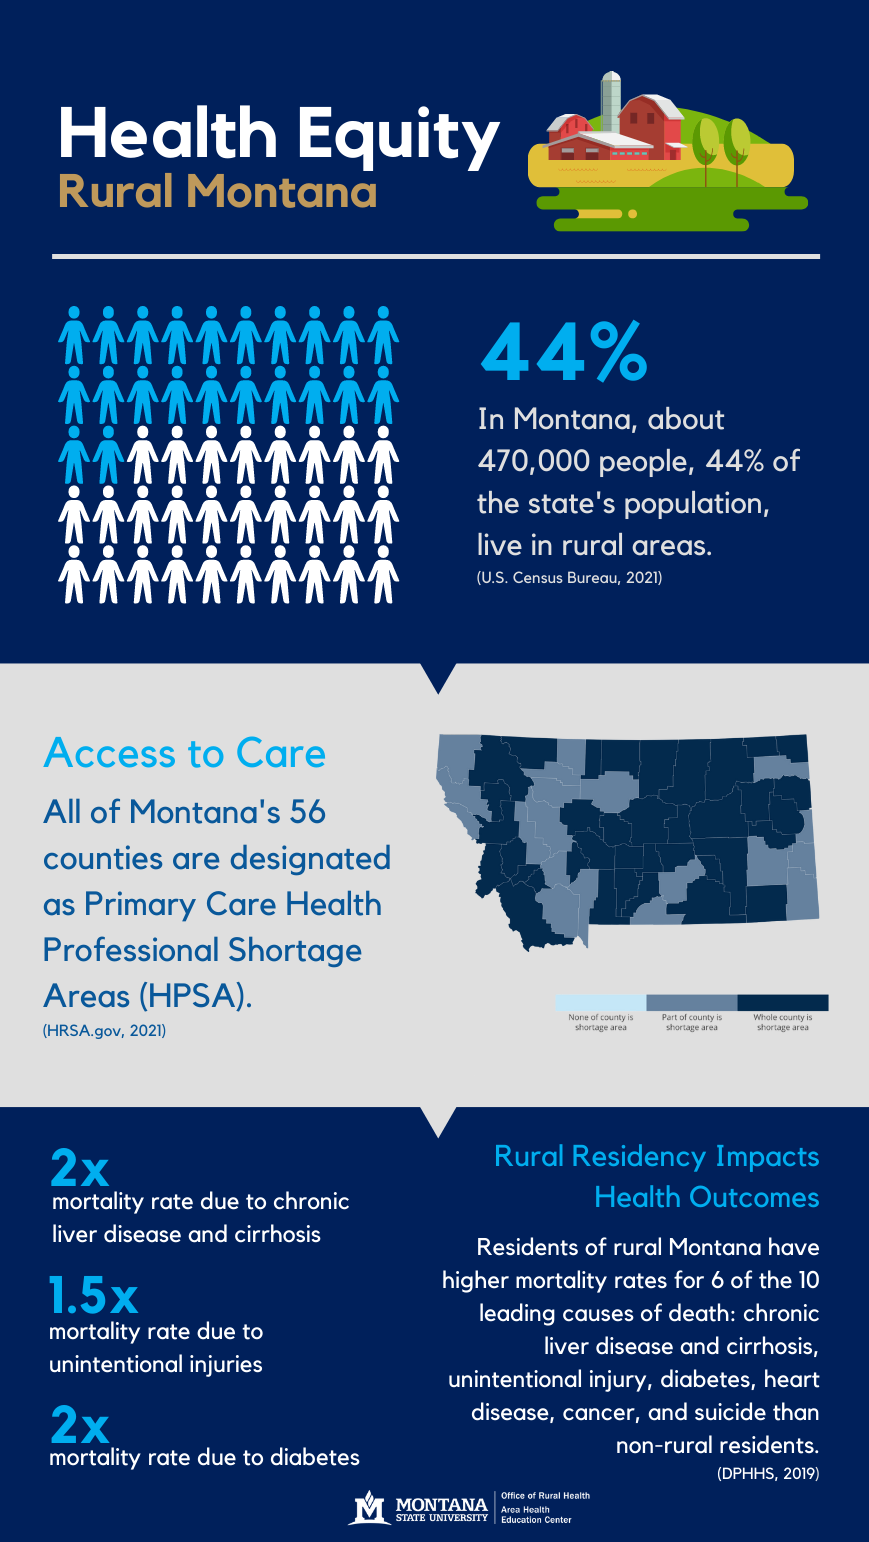 Health Equity - Rural Montana. In Montana, about 470,000 people, 44% of the state's population, live in rural areas. (U.S. Census Bureau, 2021). Access to Care - All of Montana's 56 counties are designated as Primary Care Health Professional Shortage Areas (HPSA). (HRSA.gov, 2021). Map of Montana with darkened areas for counties experiencing part or whole counties in shortage areas. All of Montana counties fall into these two categories. Rural Residency Impacts Health Outcomes - Residents of rural Montana have higher mortality rates for 6 of the 10 leading causes of death: chronic liver disease and cirrhosis, unintentional injury, diabetes, heart disease, cancer, and suicide than non-rural residents. (DPHHS, 2019). 2x mortality rate due to chronic liver disease and cirrhosis. 1.5x mortality rate due to unintentional injuries. 2x mortality rate due to diabetes. 